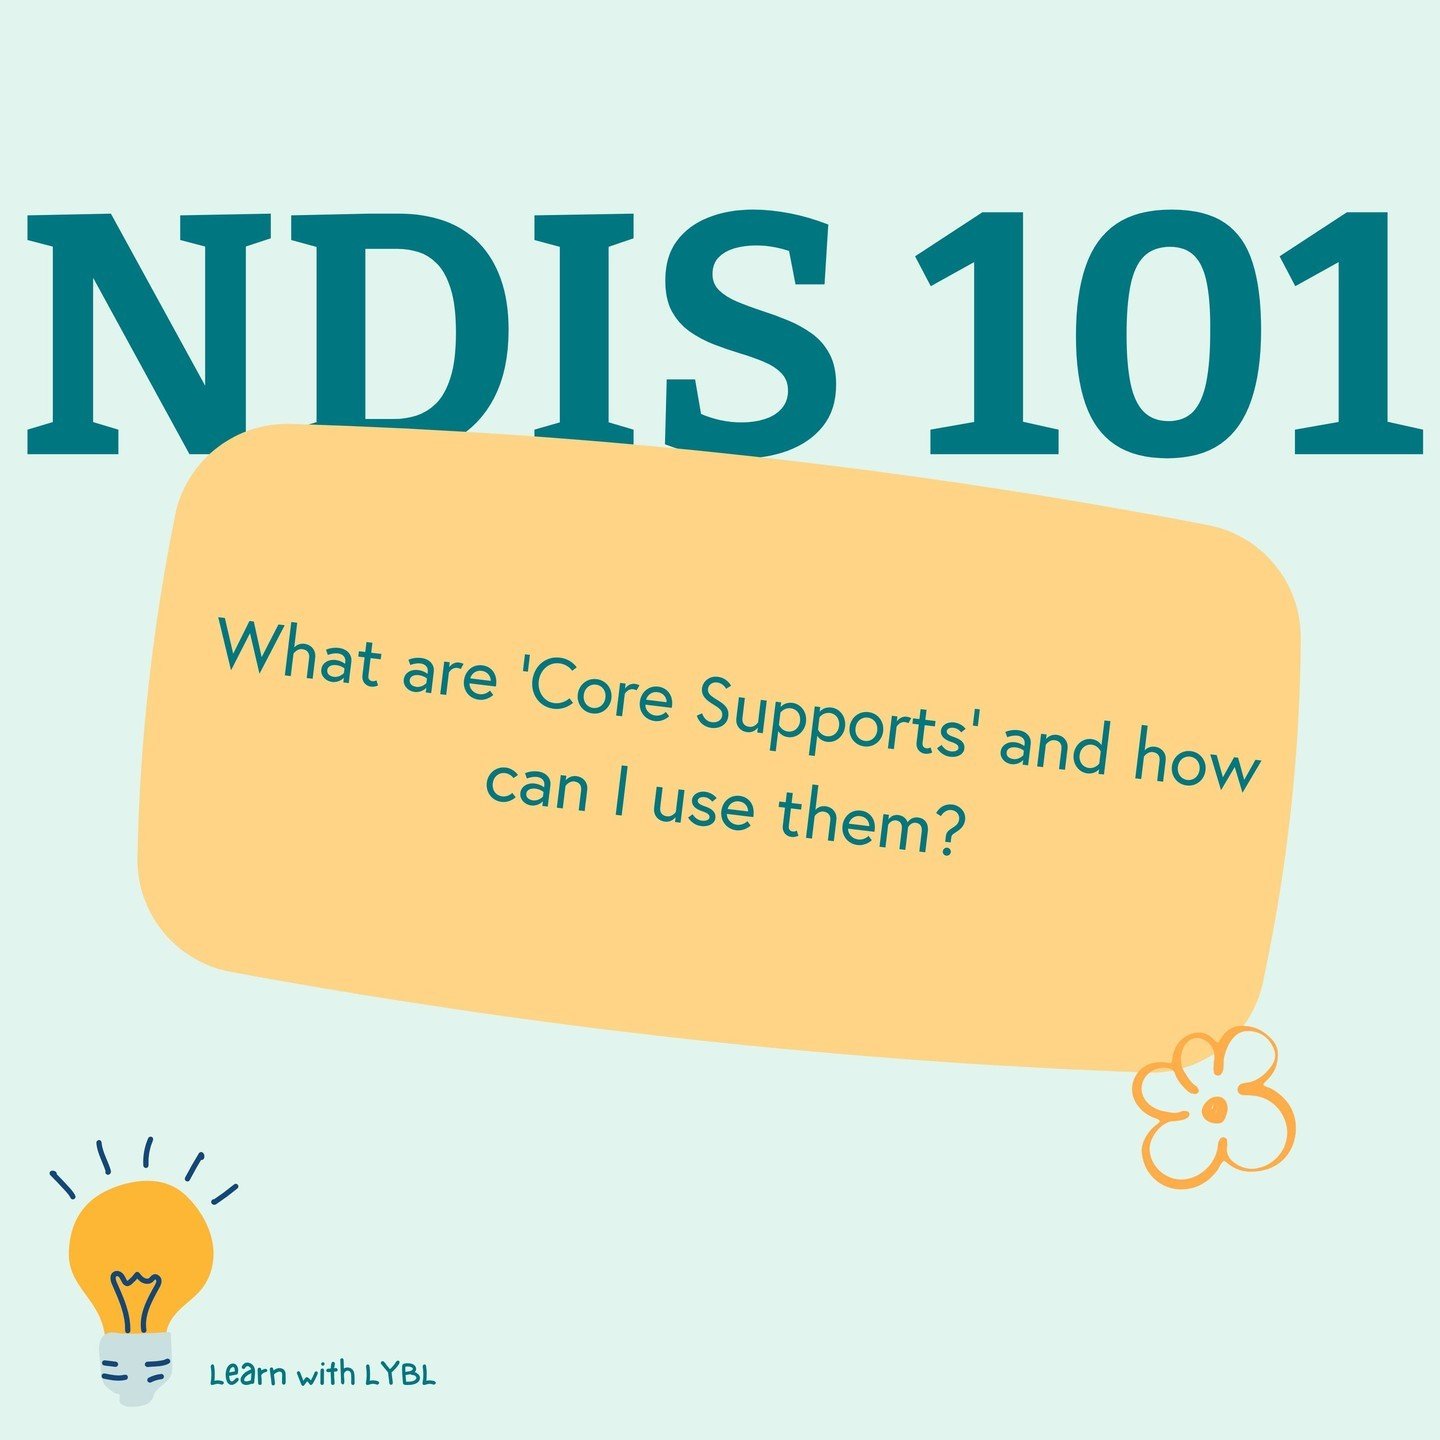 📘 NDIS 101: Your Family&rsquo;s Guide - Decoding Core Supports: Requesting and Understanding Them 📘

Hello LYBL families! Today in &quot;NDIS 101,&quot; we dive deeper into Core Supports &ndash; what they are, how to request them, and navigating th